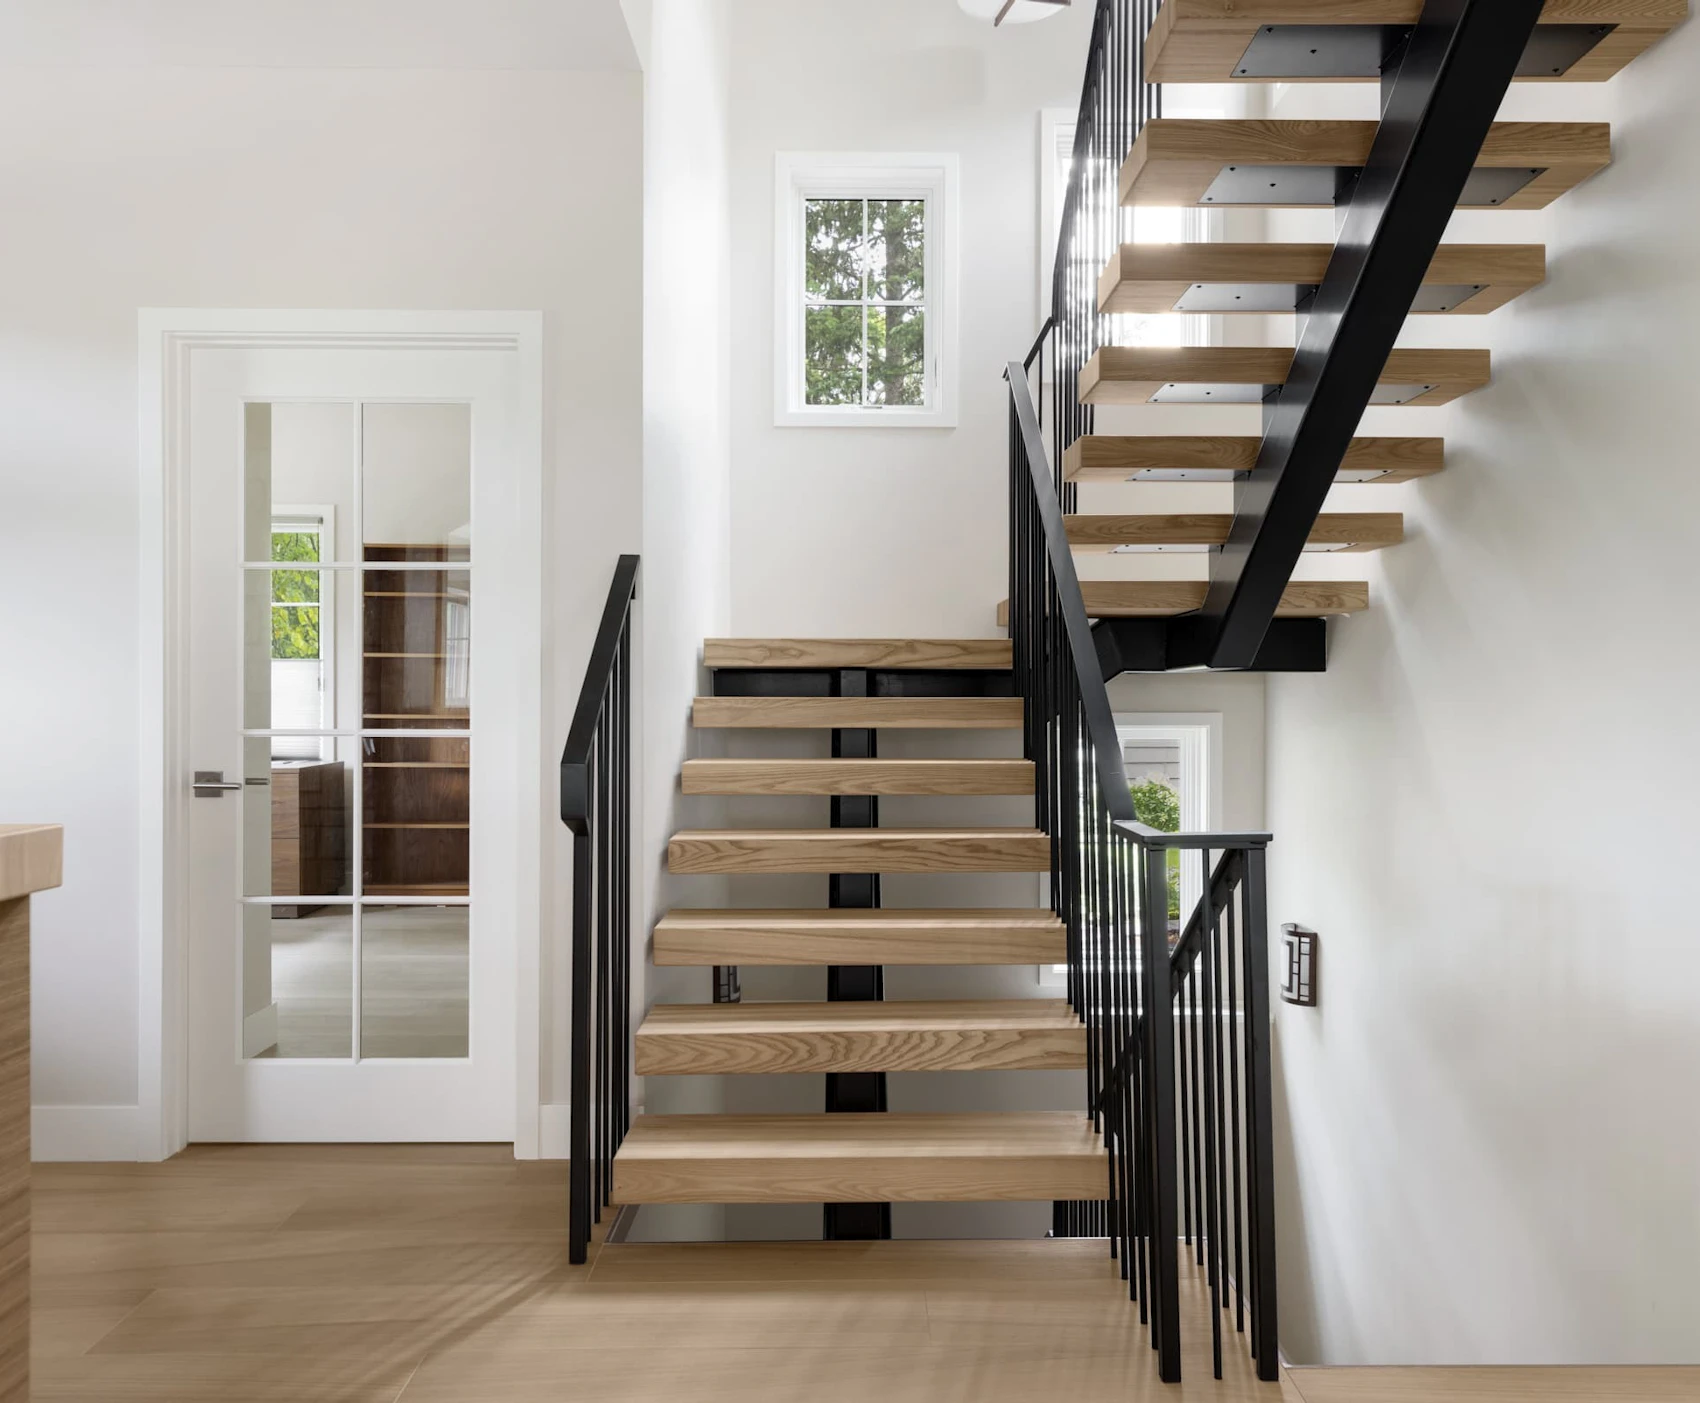 A floating steel staircase with white oak stair treads